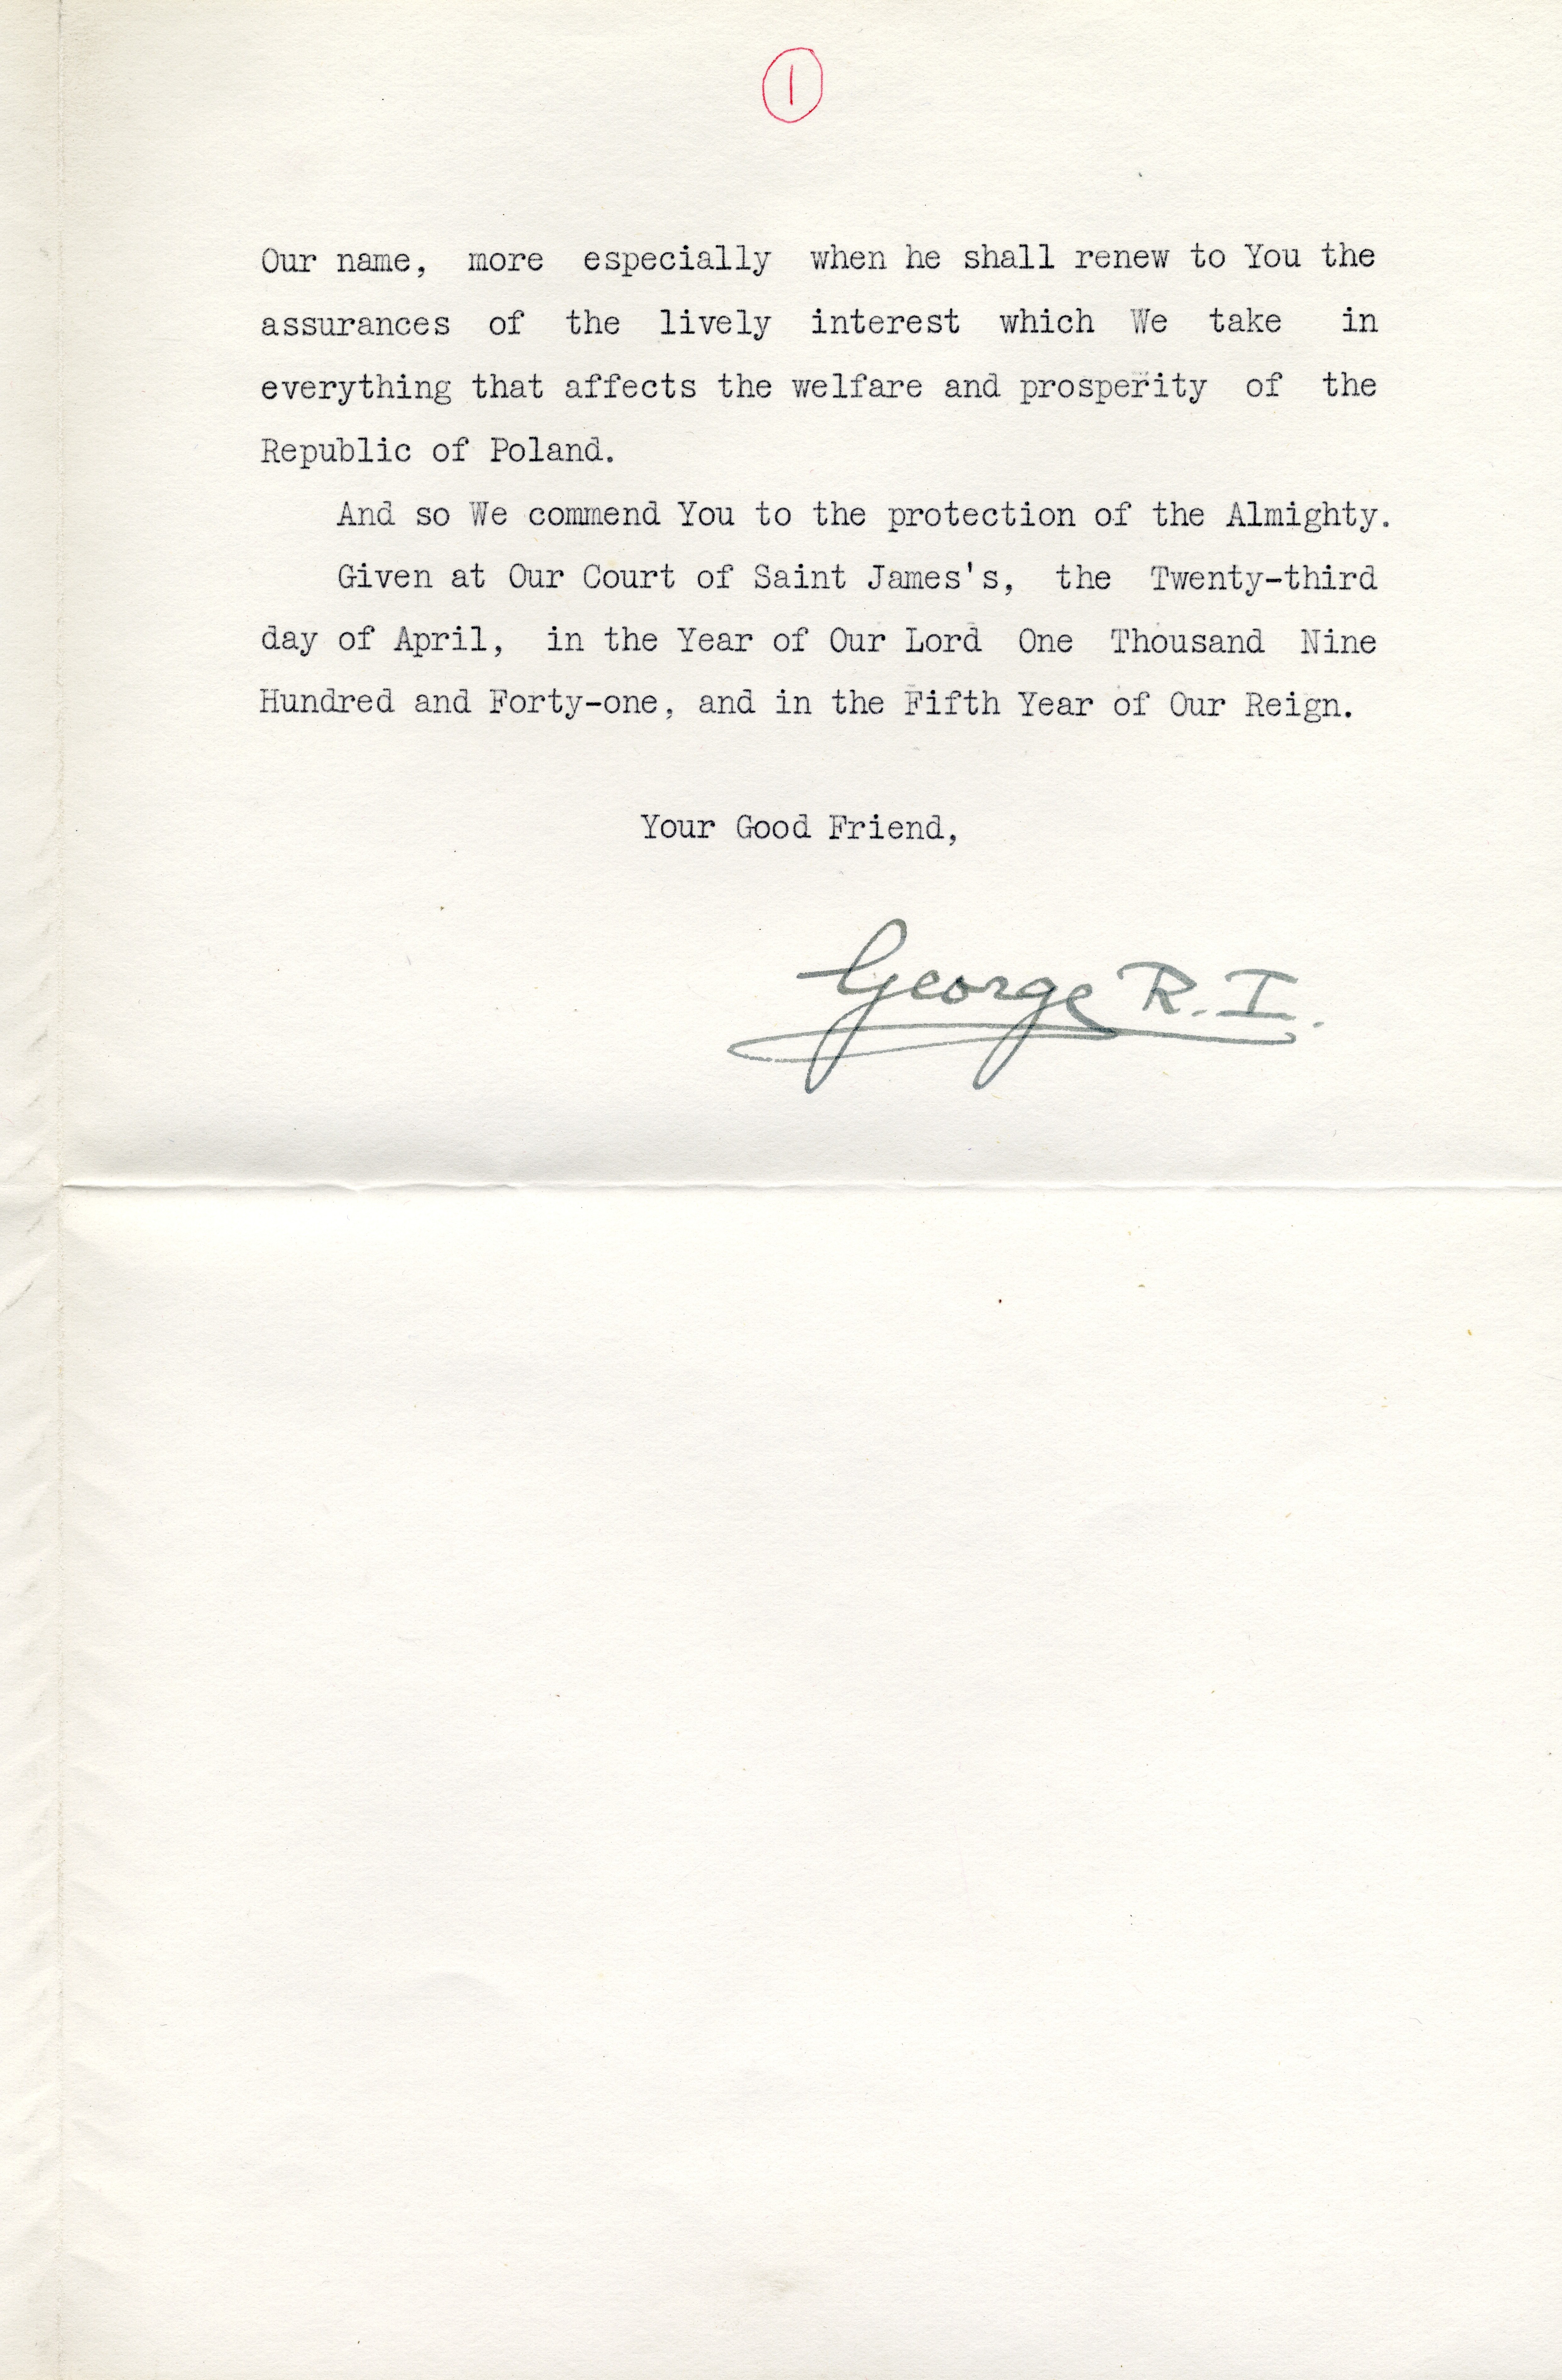 The credentials of British ambassador Cecil Francis Dormer signed by King George VI